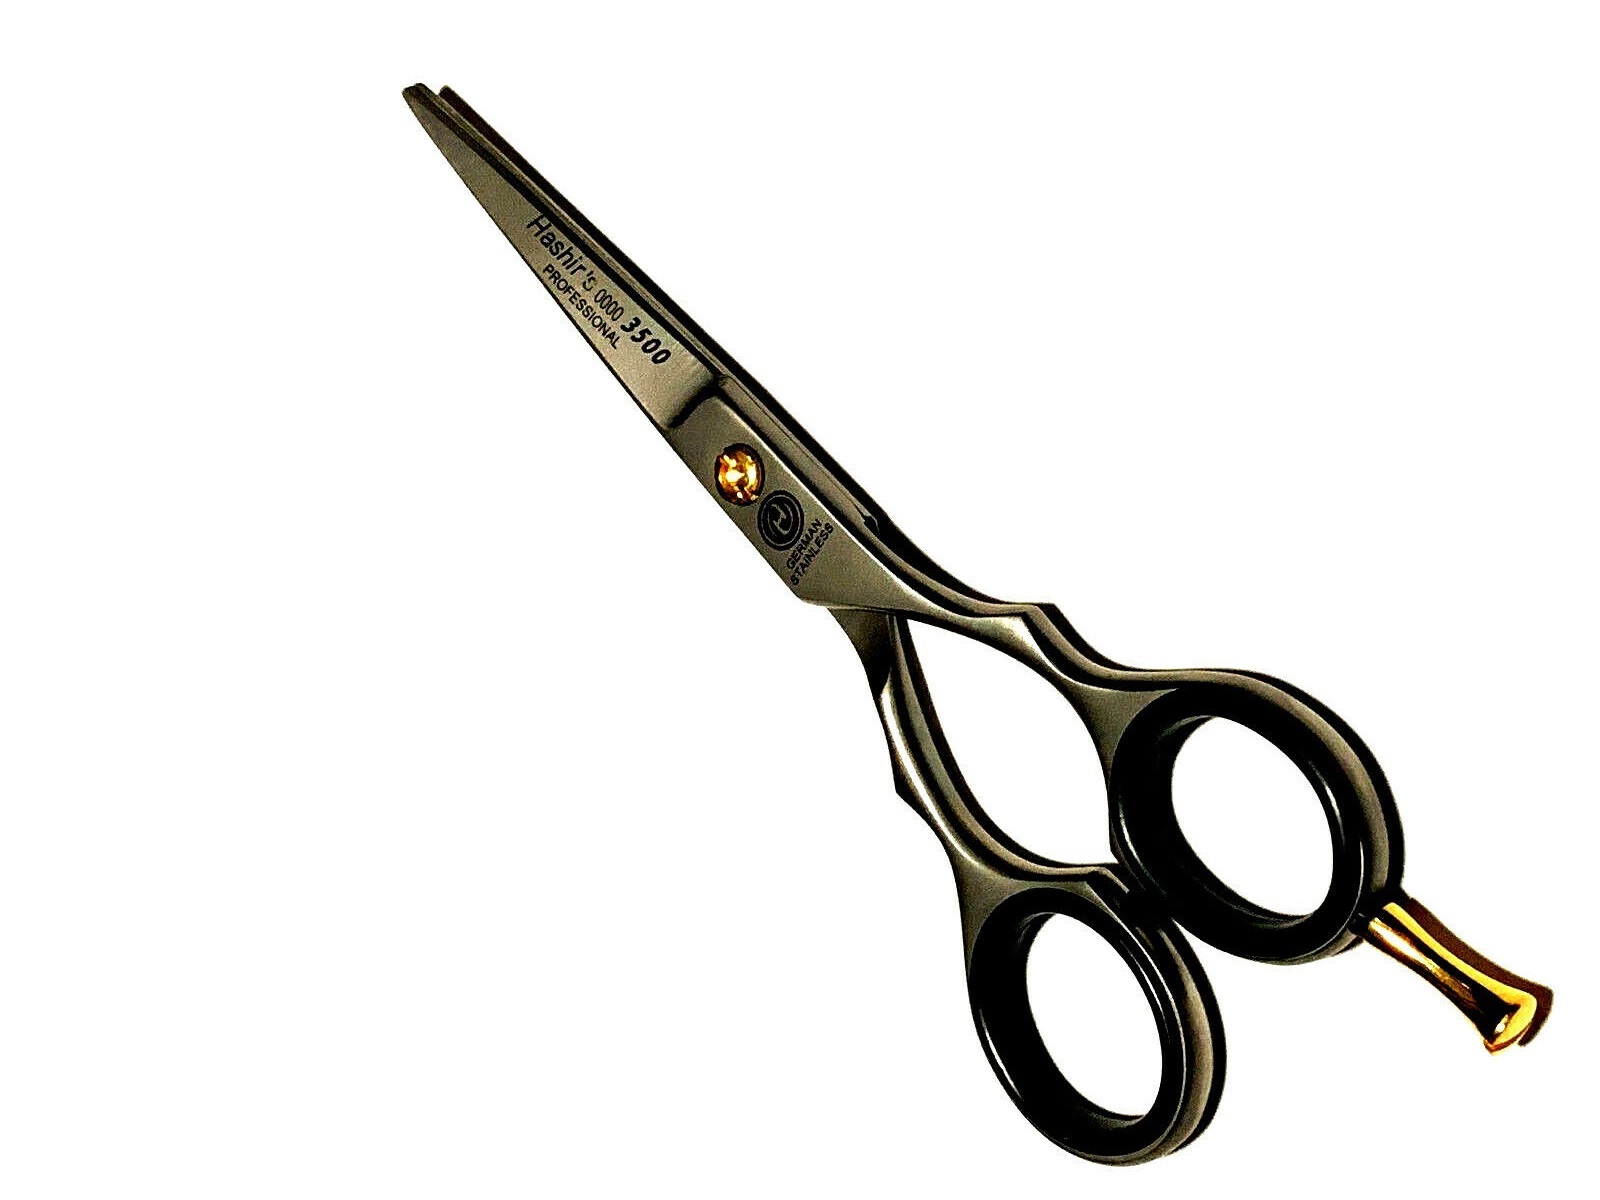 Special Design Butterfly Even Handle Hair Cutting Scissors, High-quality  pet grooming scissors wholesale